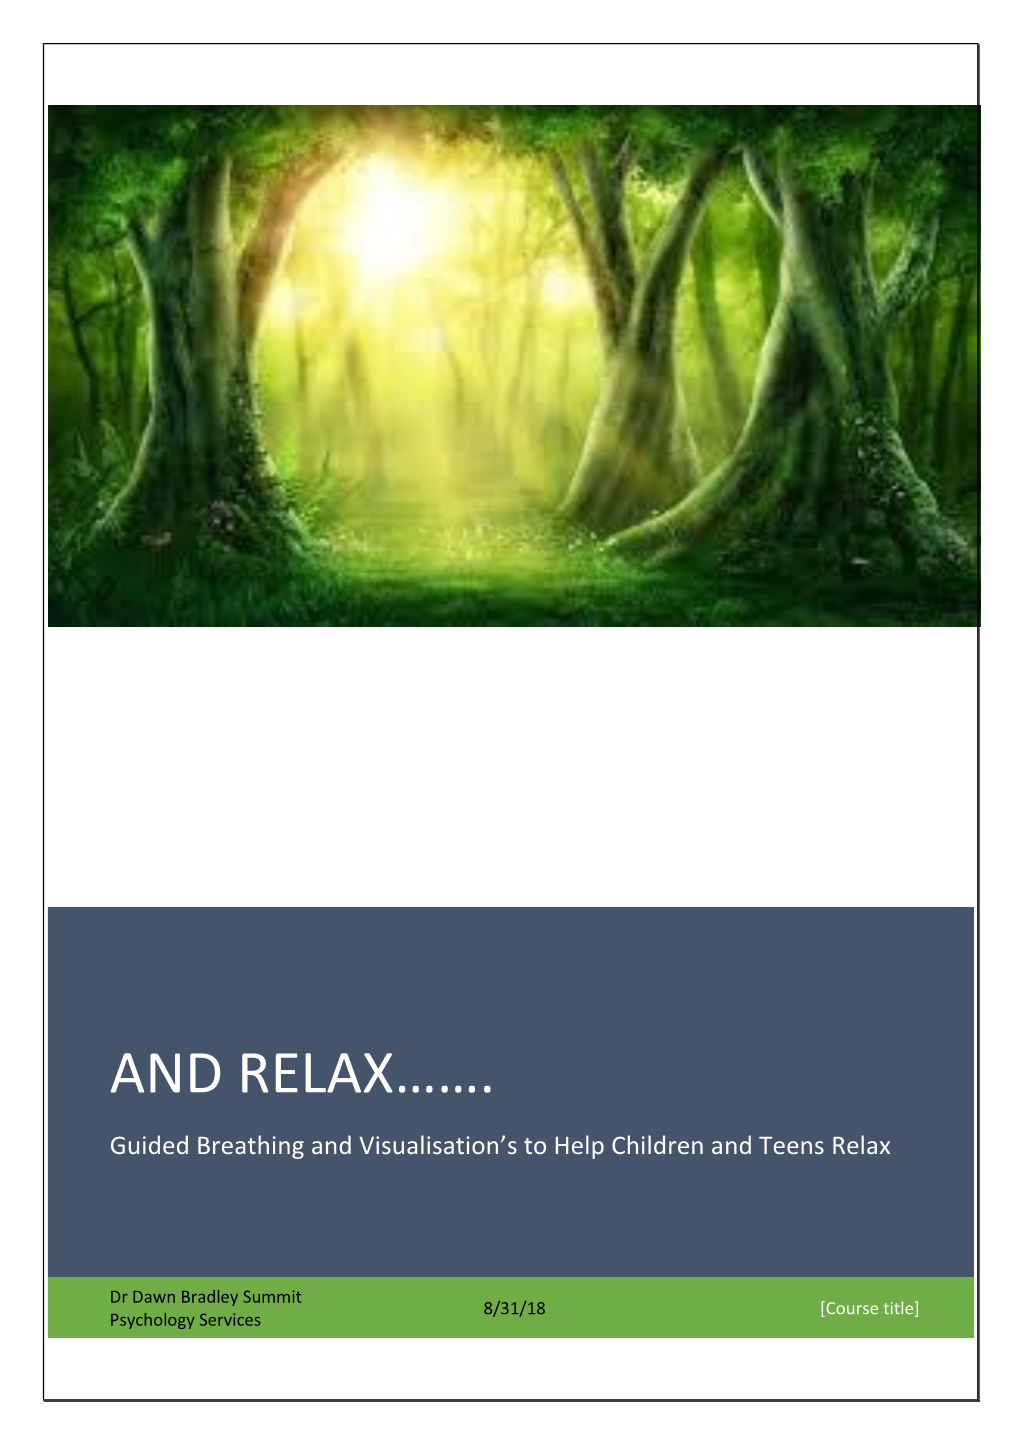 AND RELAX……. Guided Breathing and Visualisation’S to Help Children and Teens Relax